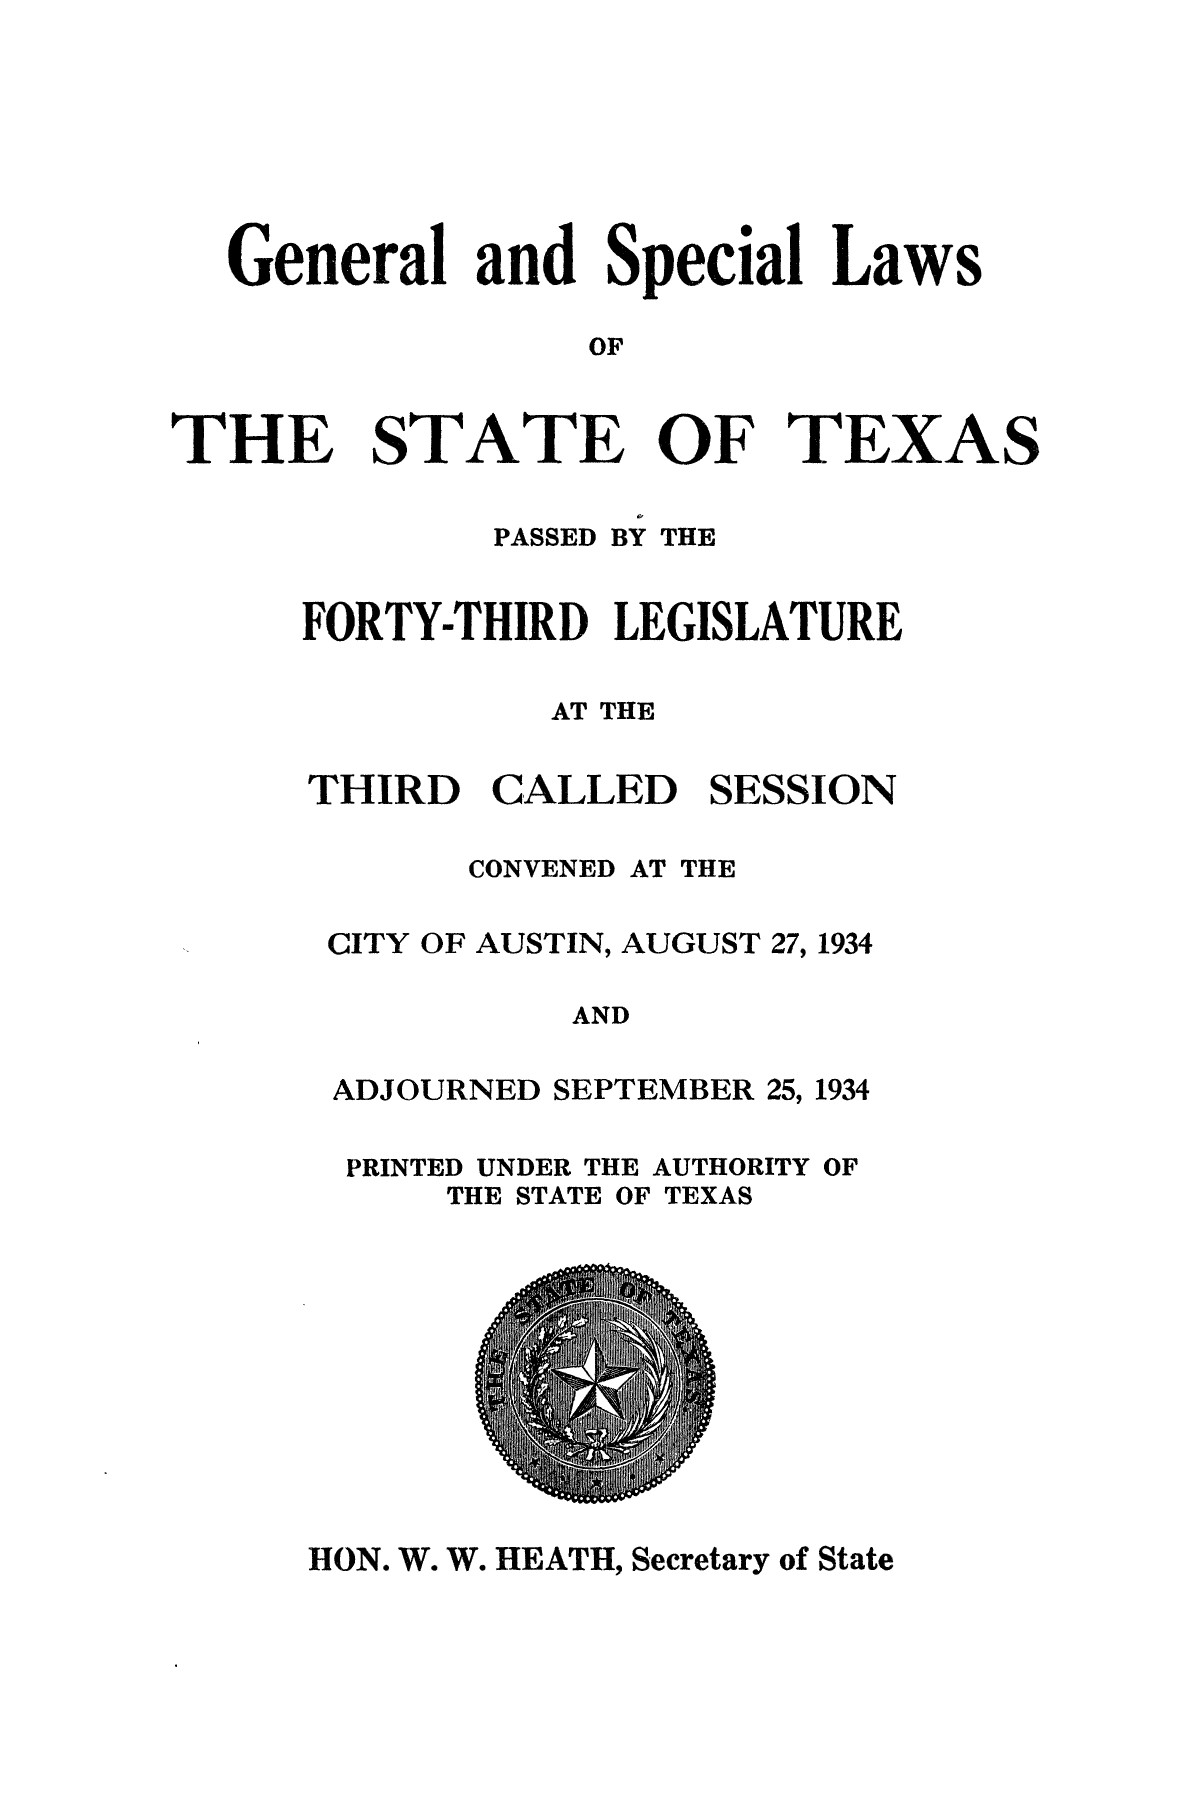 The Laws of Texas, 1934-1935 [Volume 29]
                                                
                                                    [Sequence #]: 247 of 2086
                                                